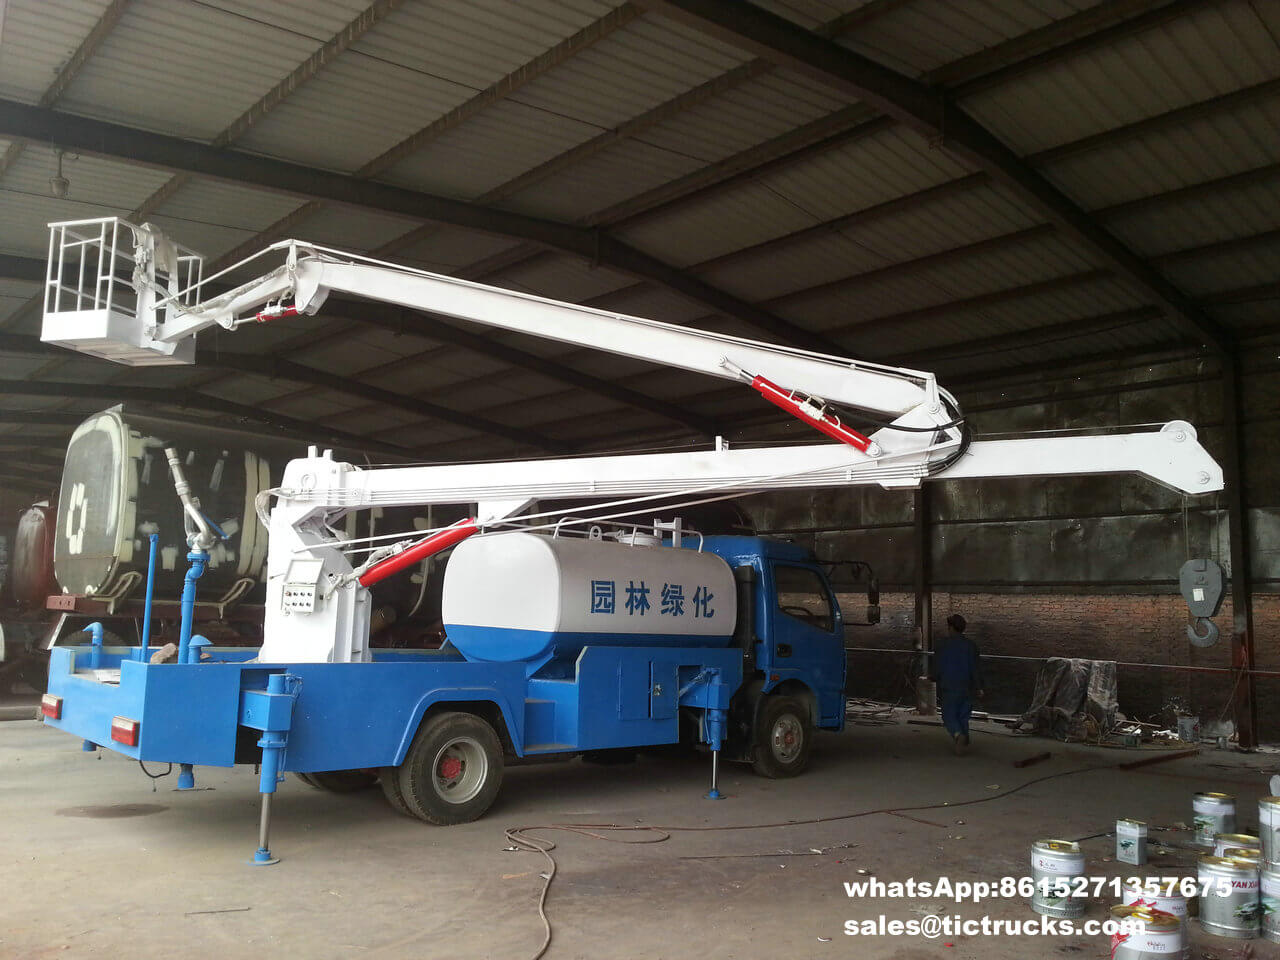  Aerial platform truck 16m with water tank and water pump Customising